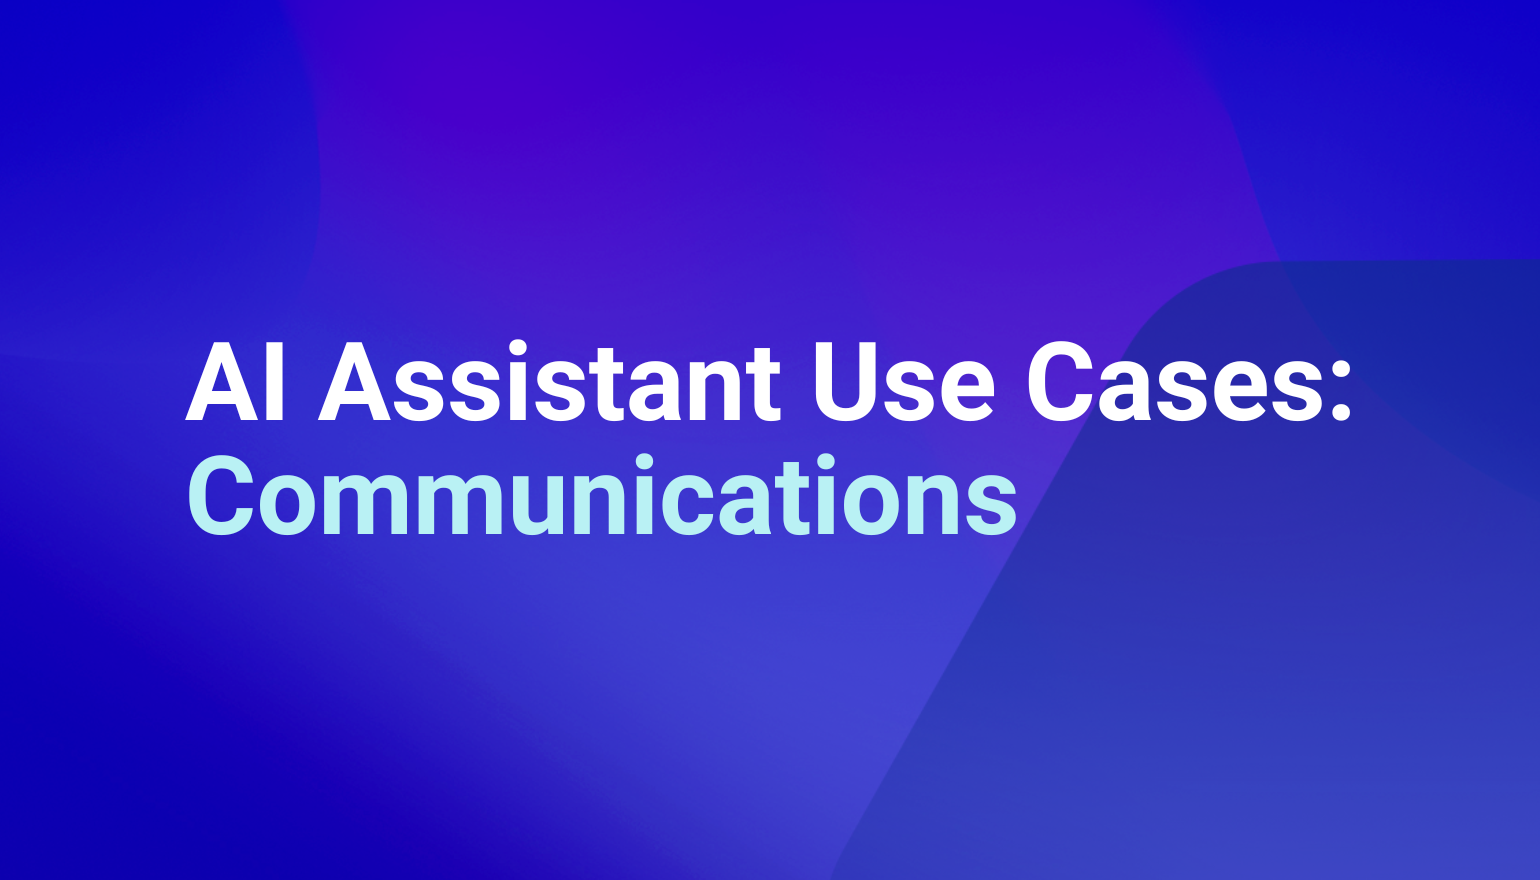 Workgrid's AI Assistant Use Cases for Internal Communications